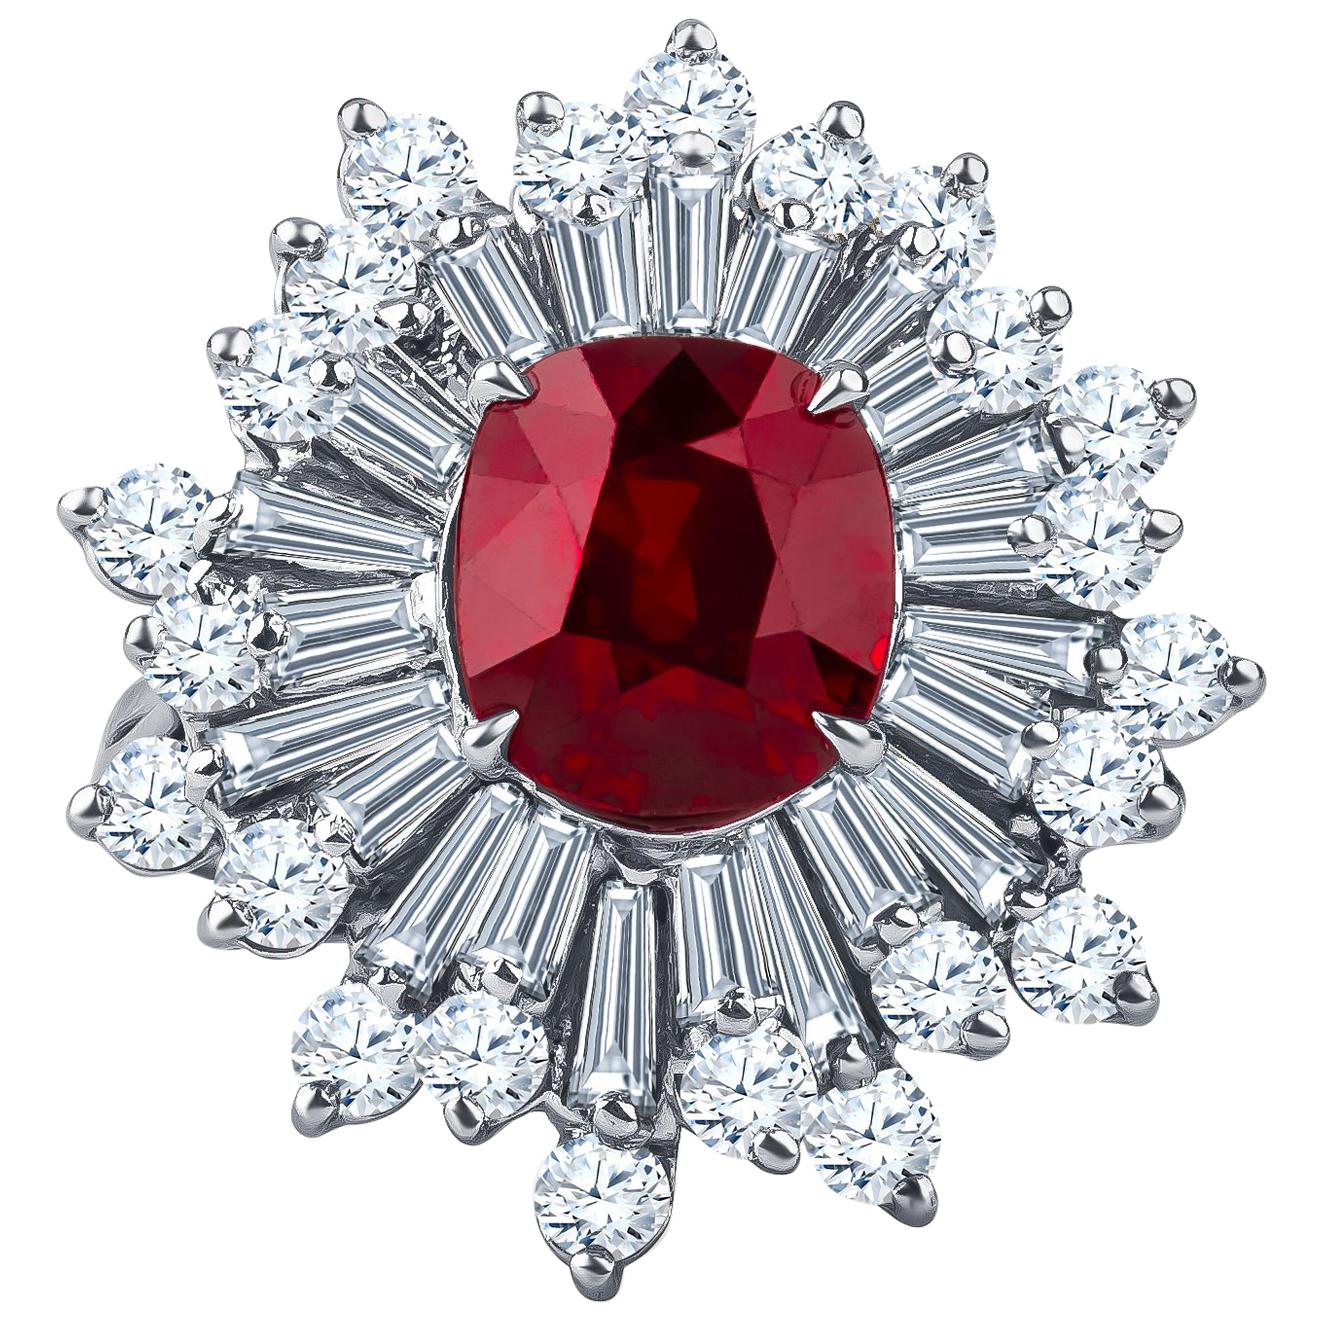 3.97 Carat Ruby Center and Fine Baguette Round Diamonds, GIA Report Included